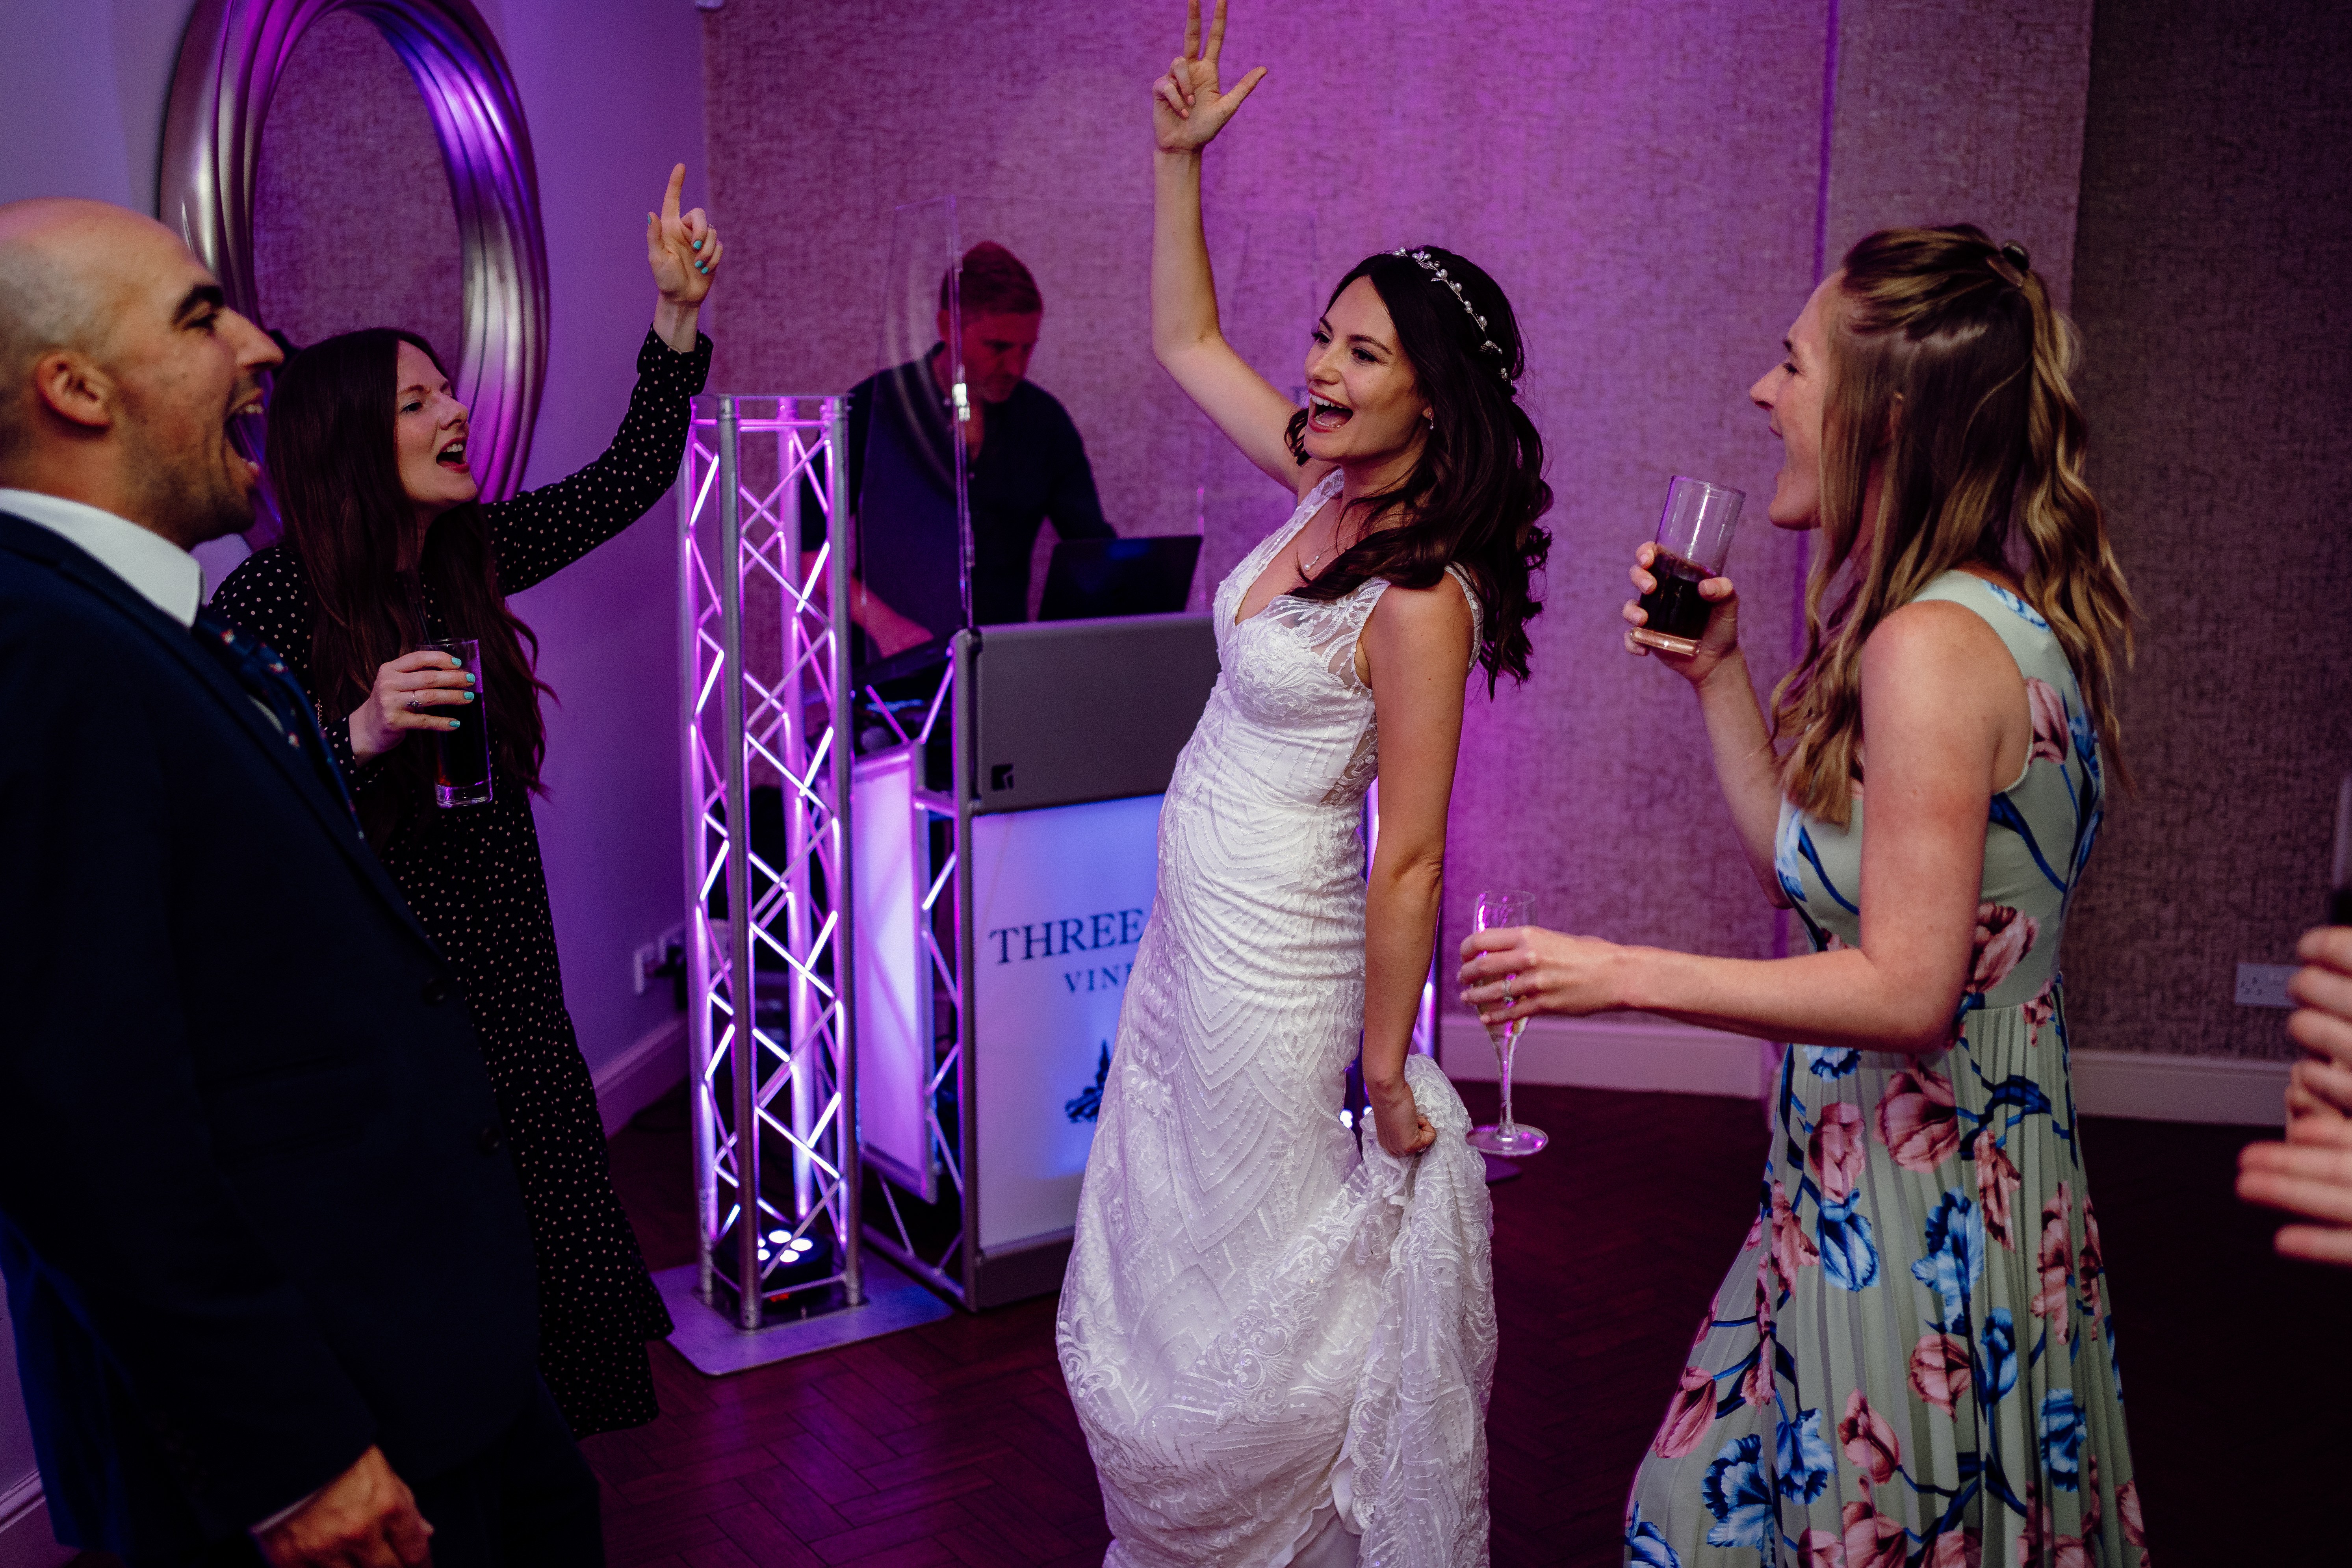 Anna left glowing Hampshire DJ reviews after This Three Choirs Wedding